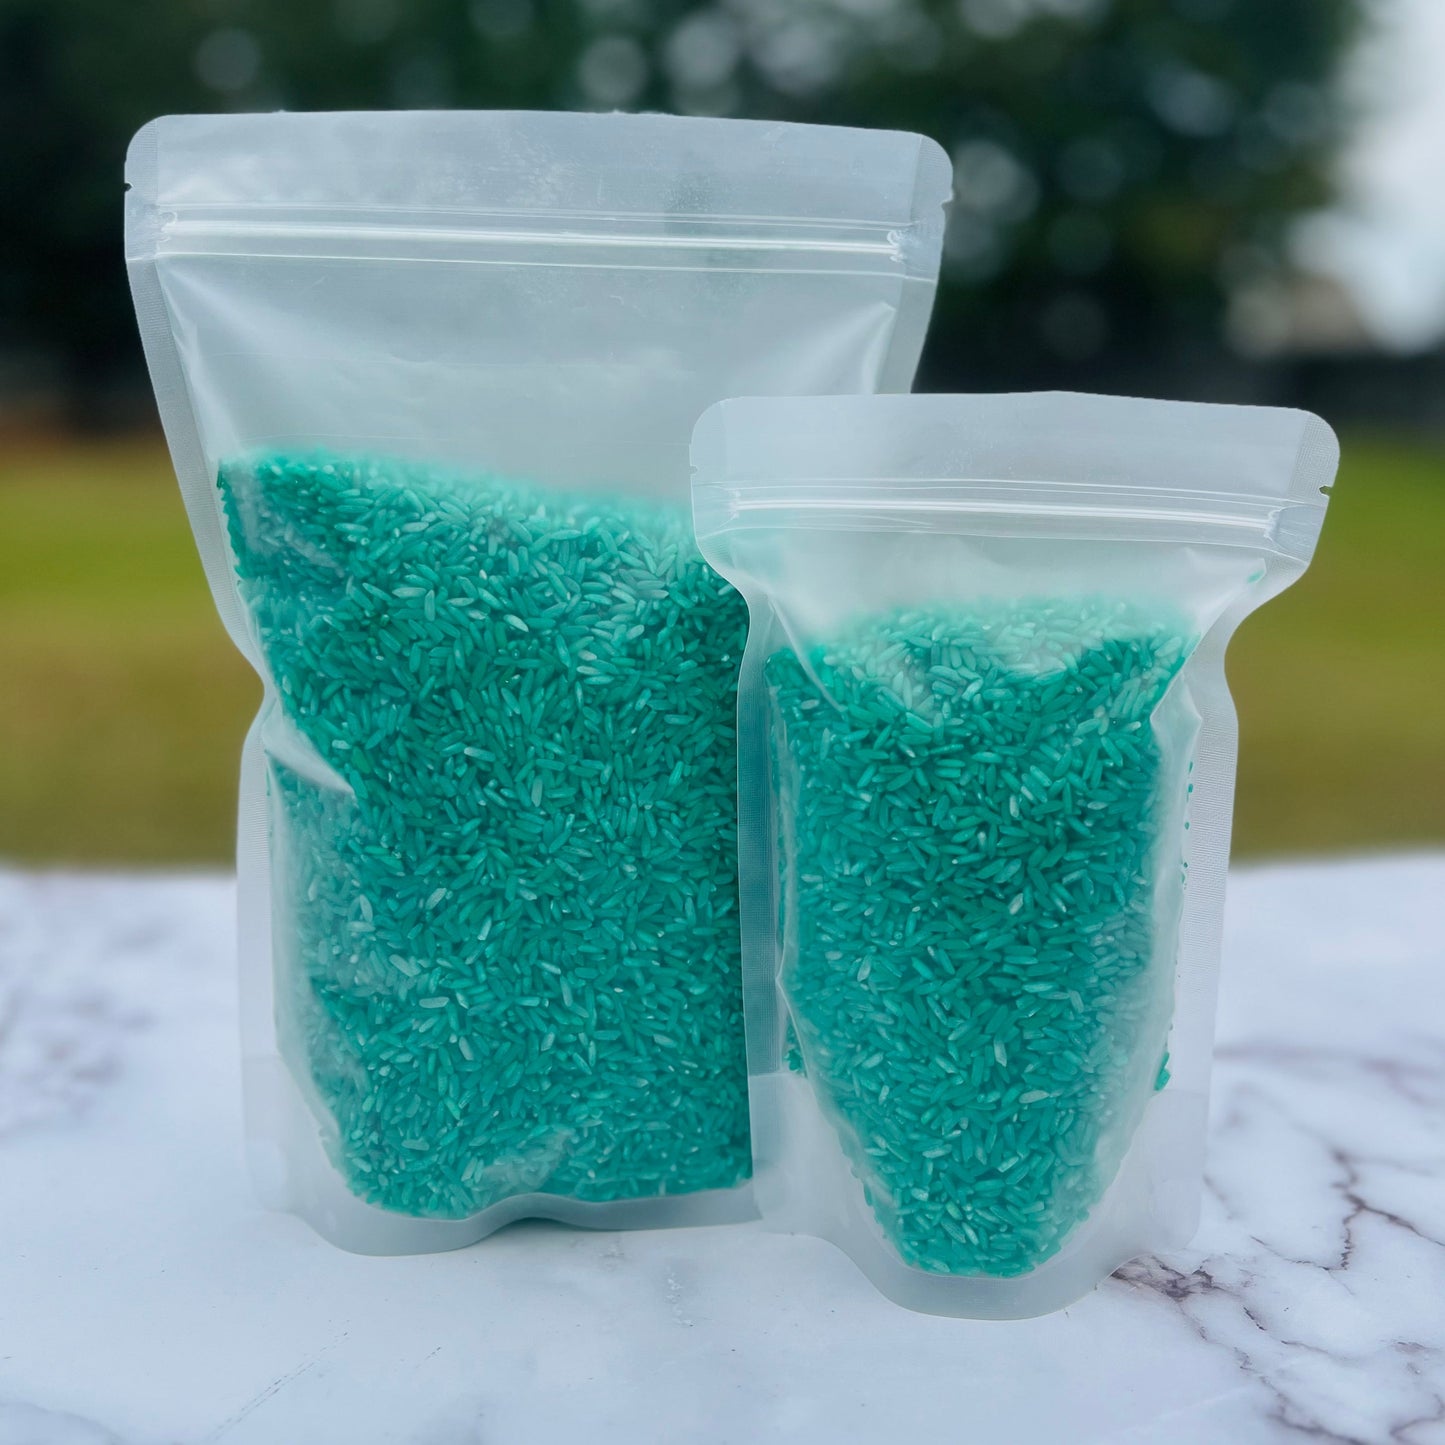 Extra Colored Rice (2 Cups)